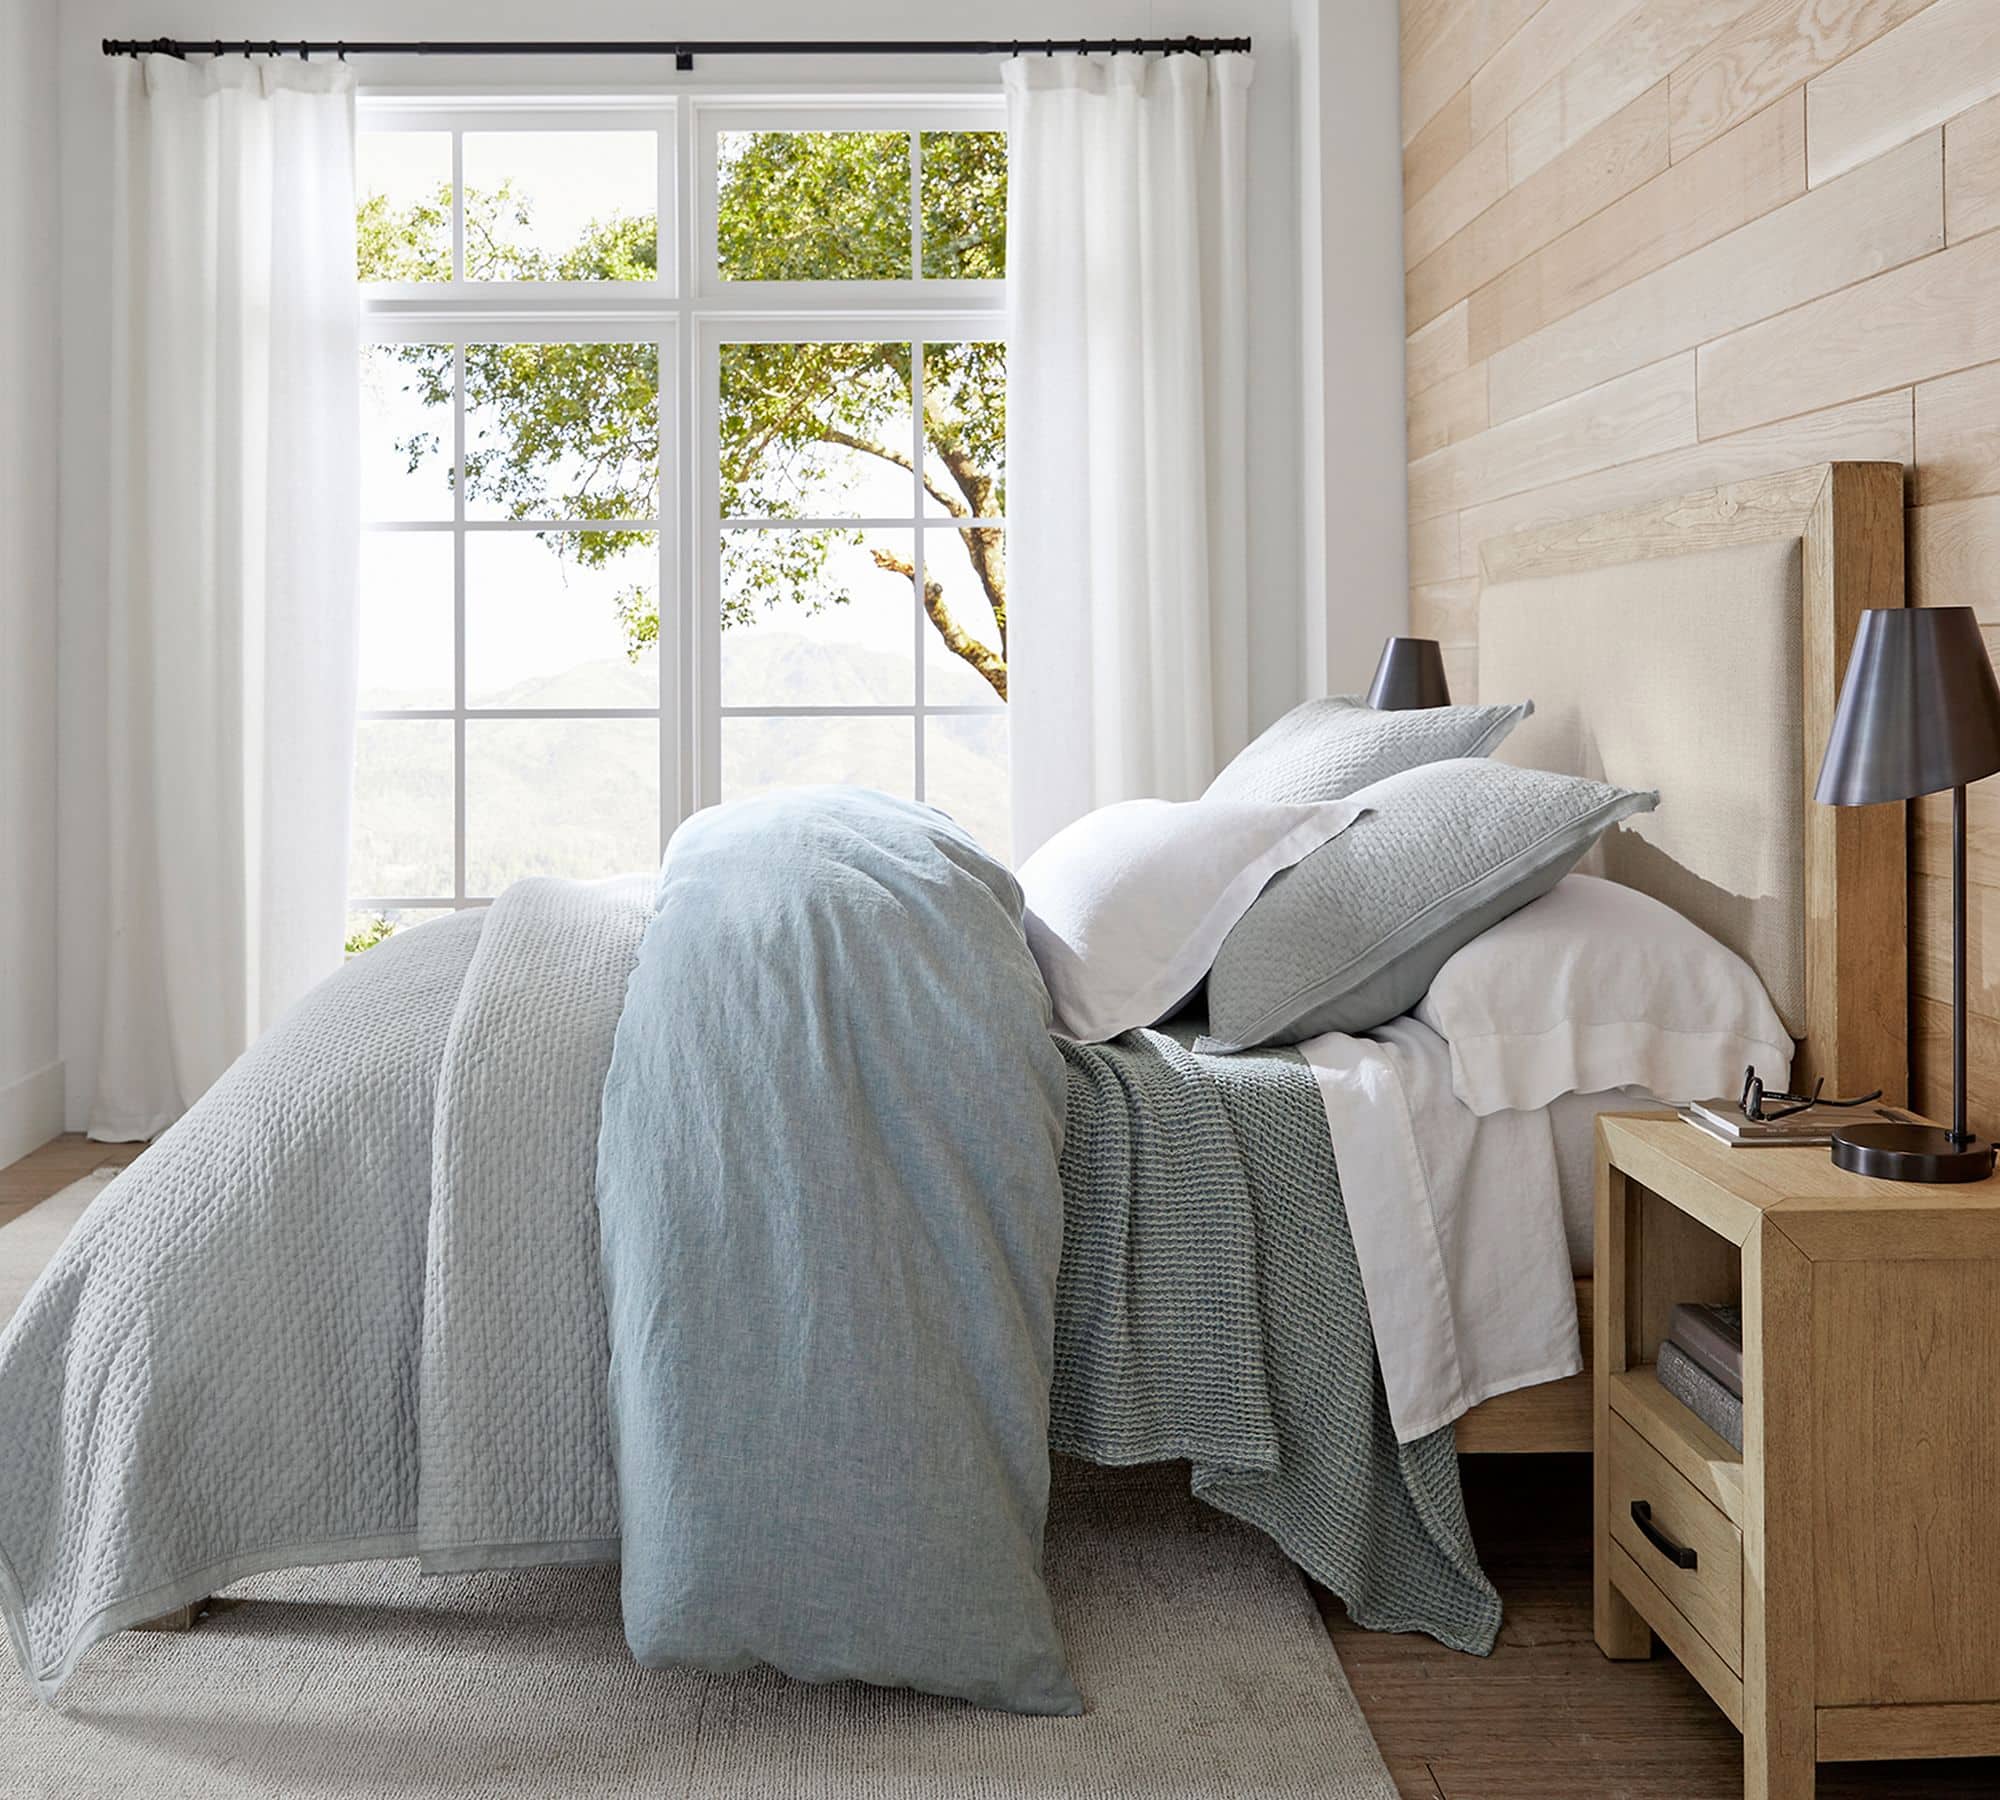 bedding in soft blue green color mixed with white sheets